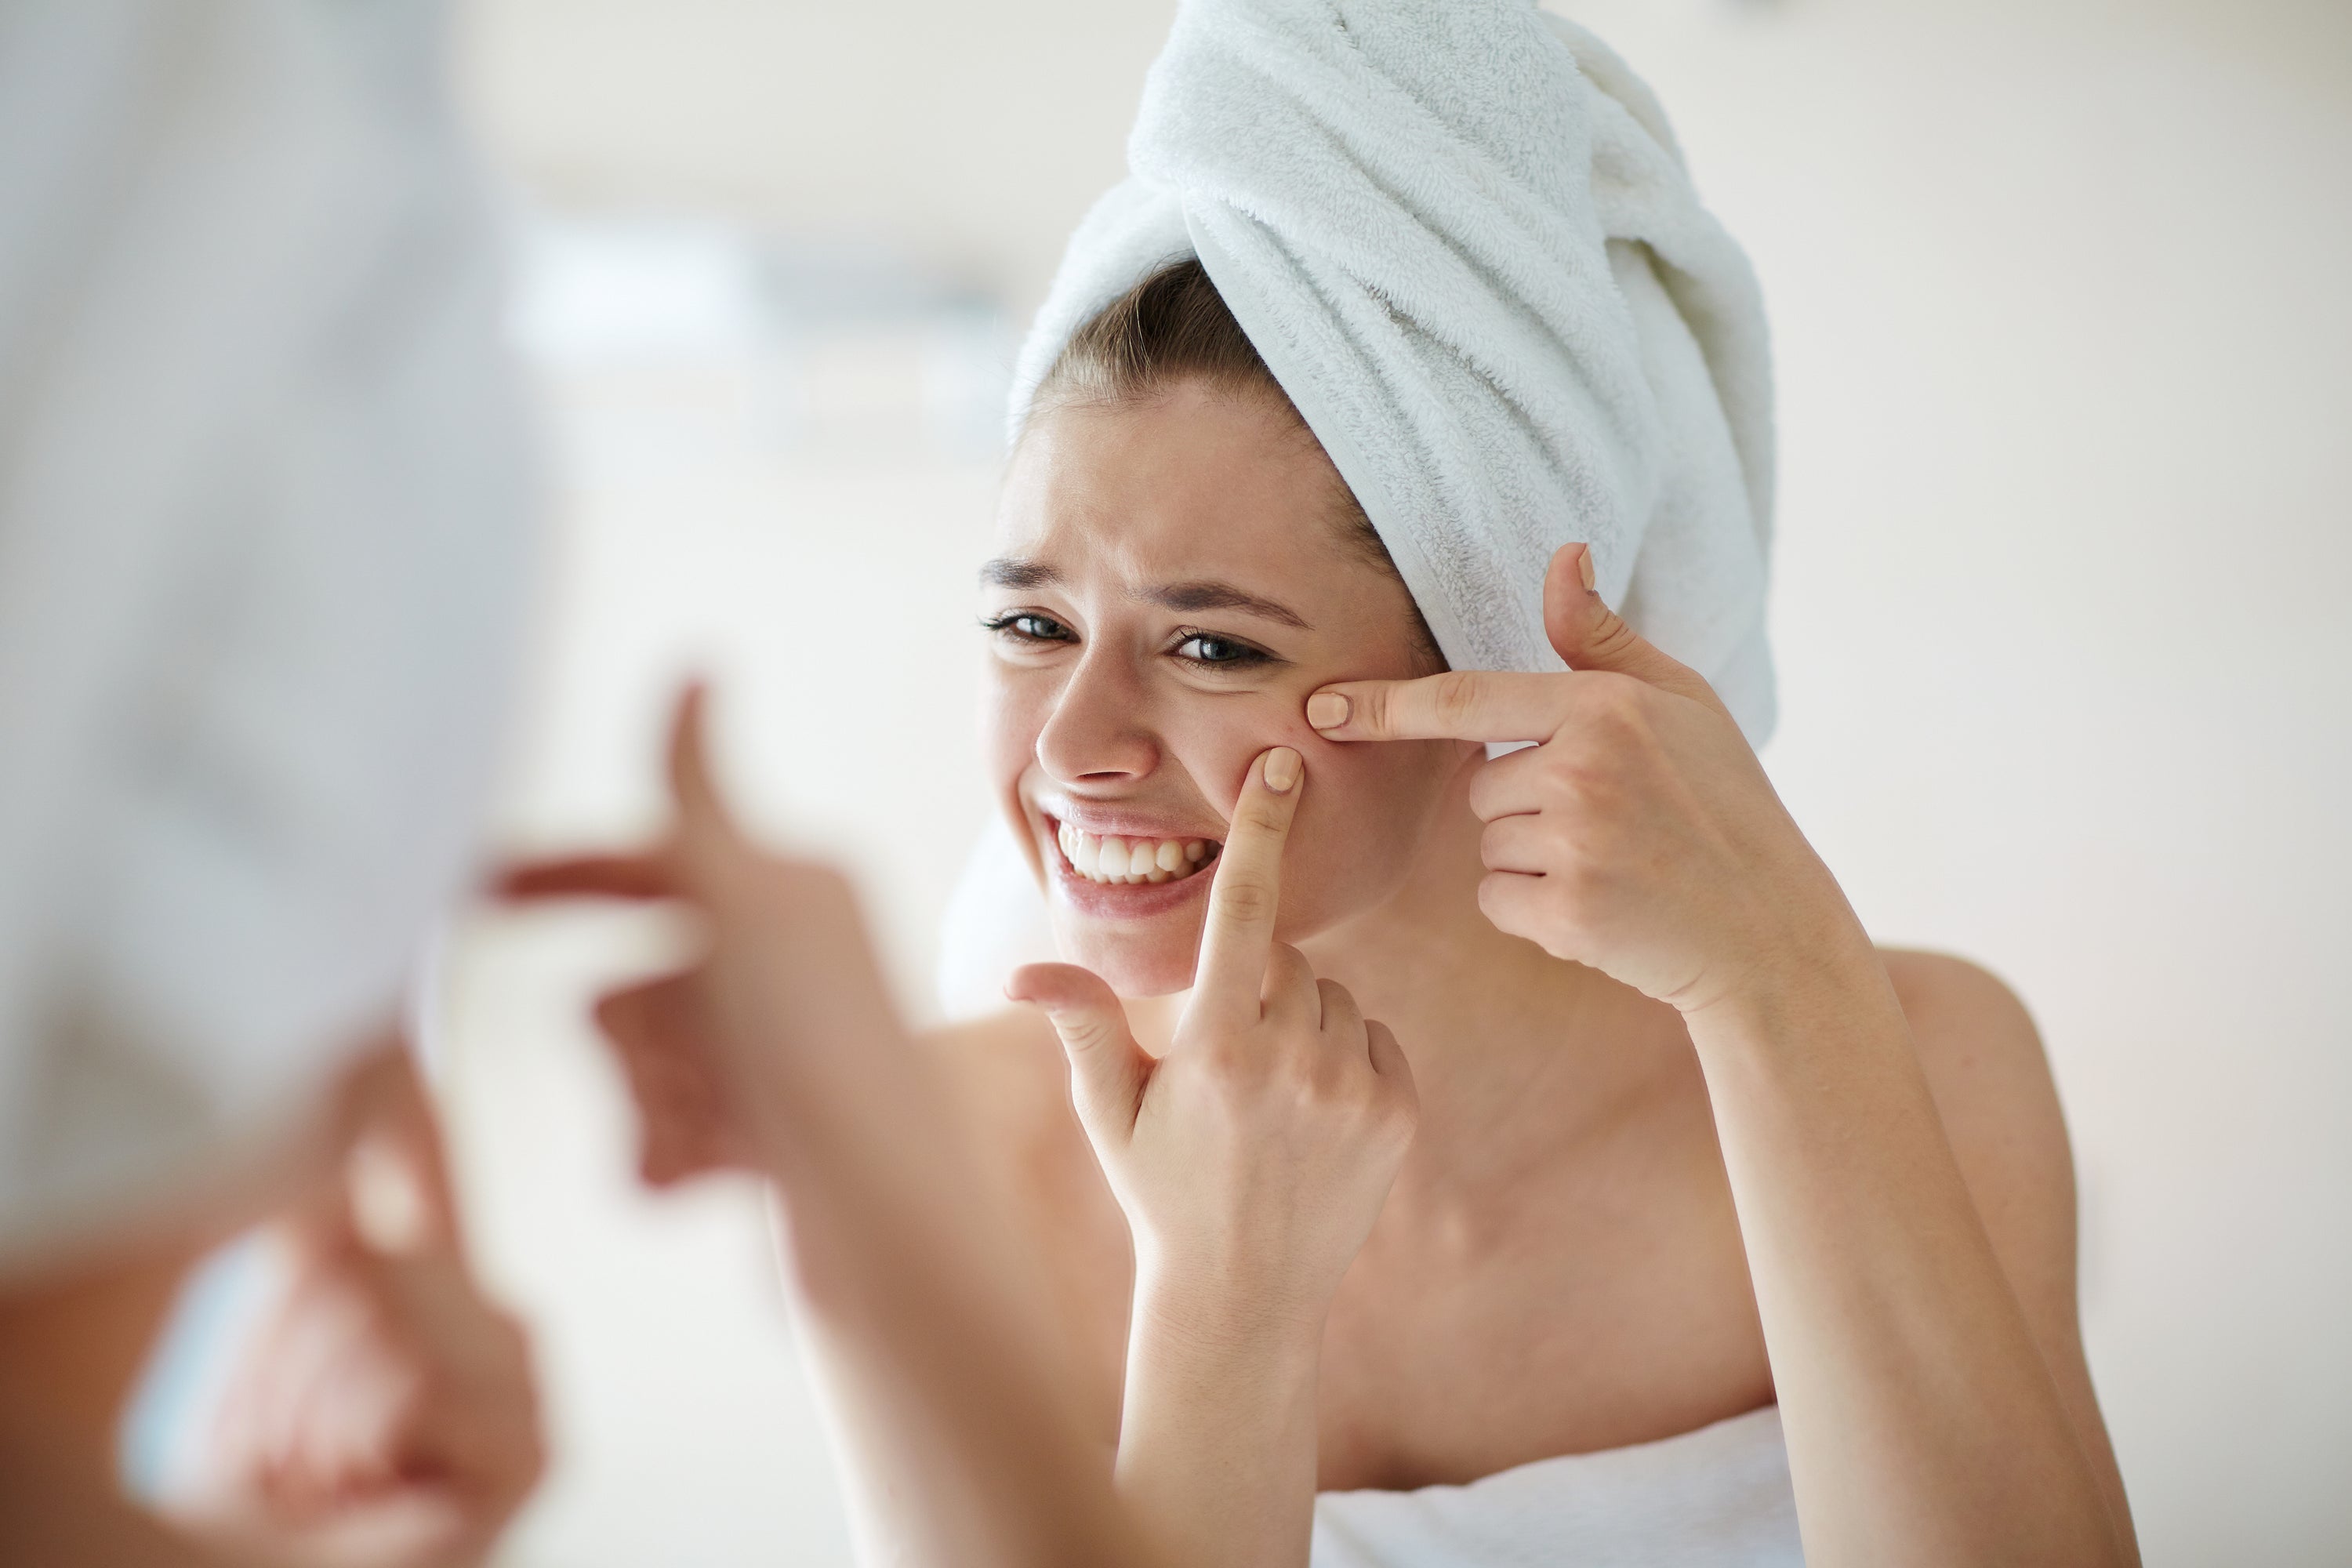 Understanding Acne: The Most Common Skin Problem